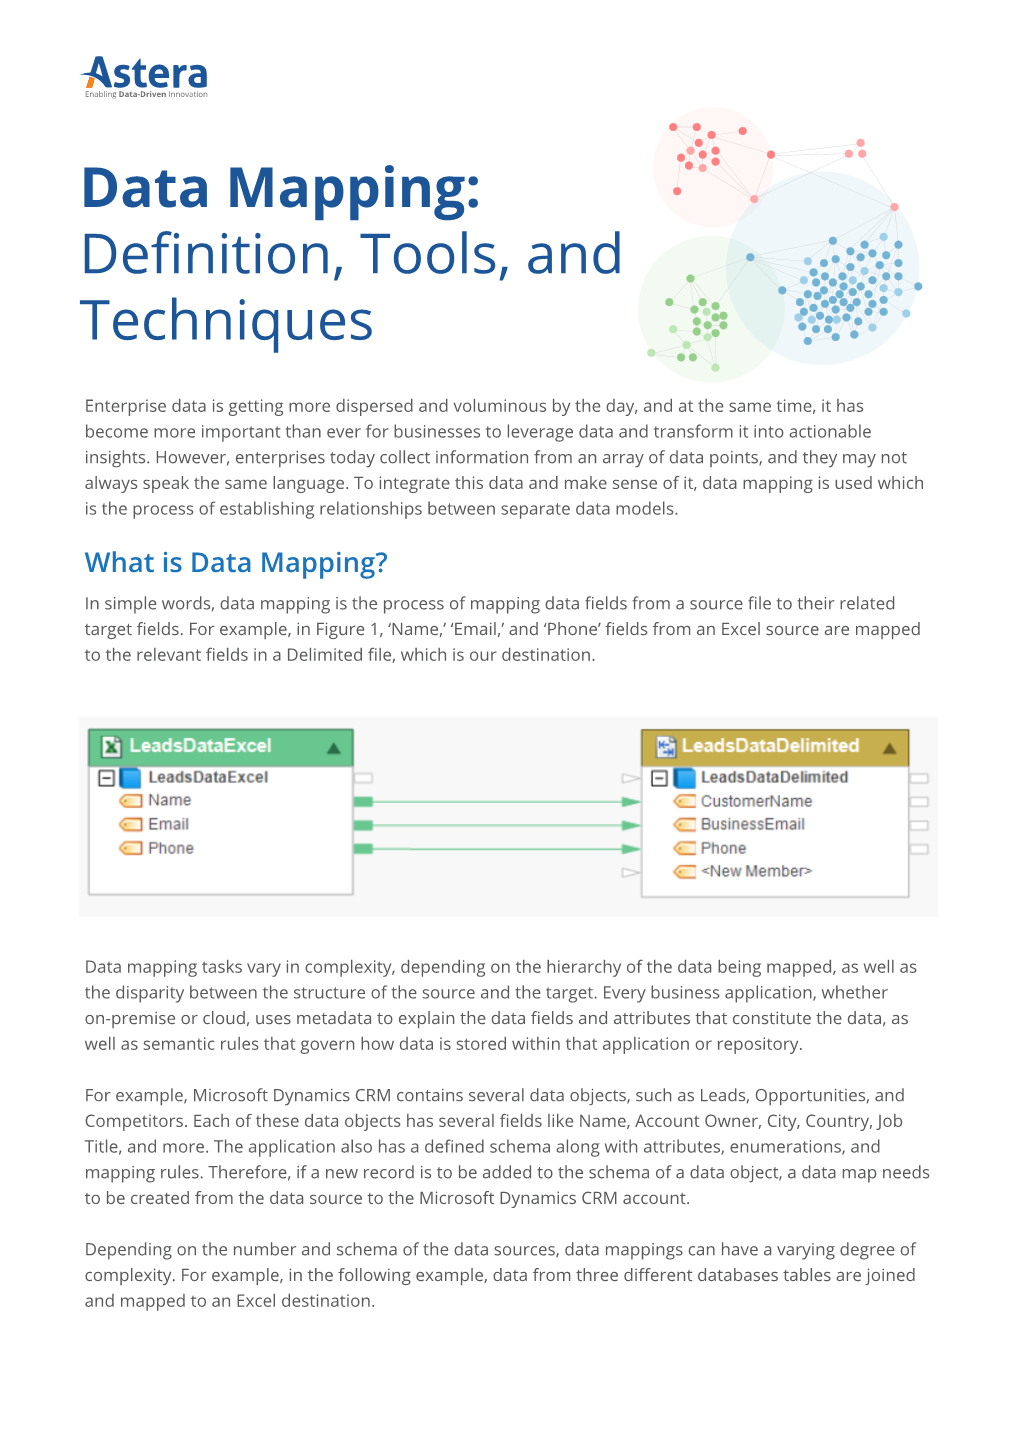 Data Mapping: Deﬁnition, Tools, and Techniques